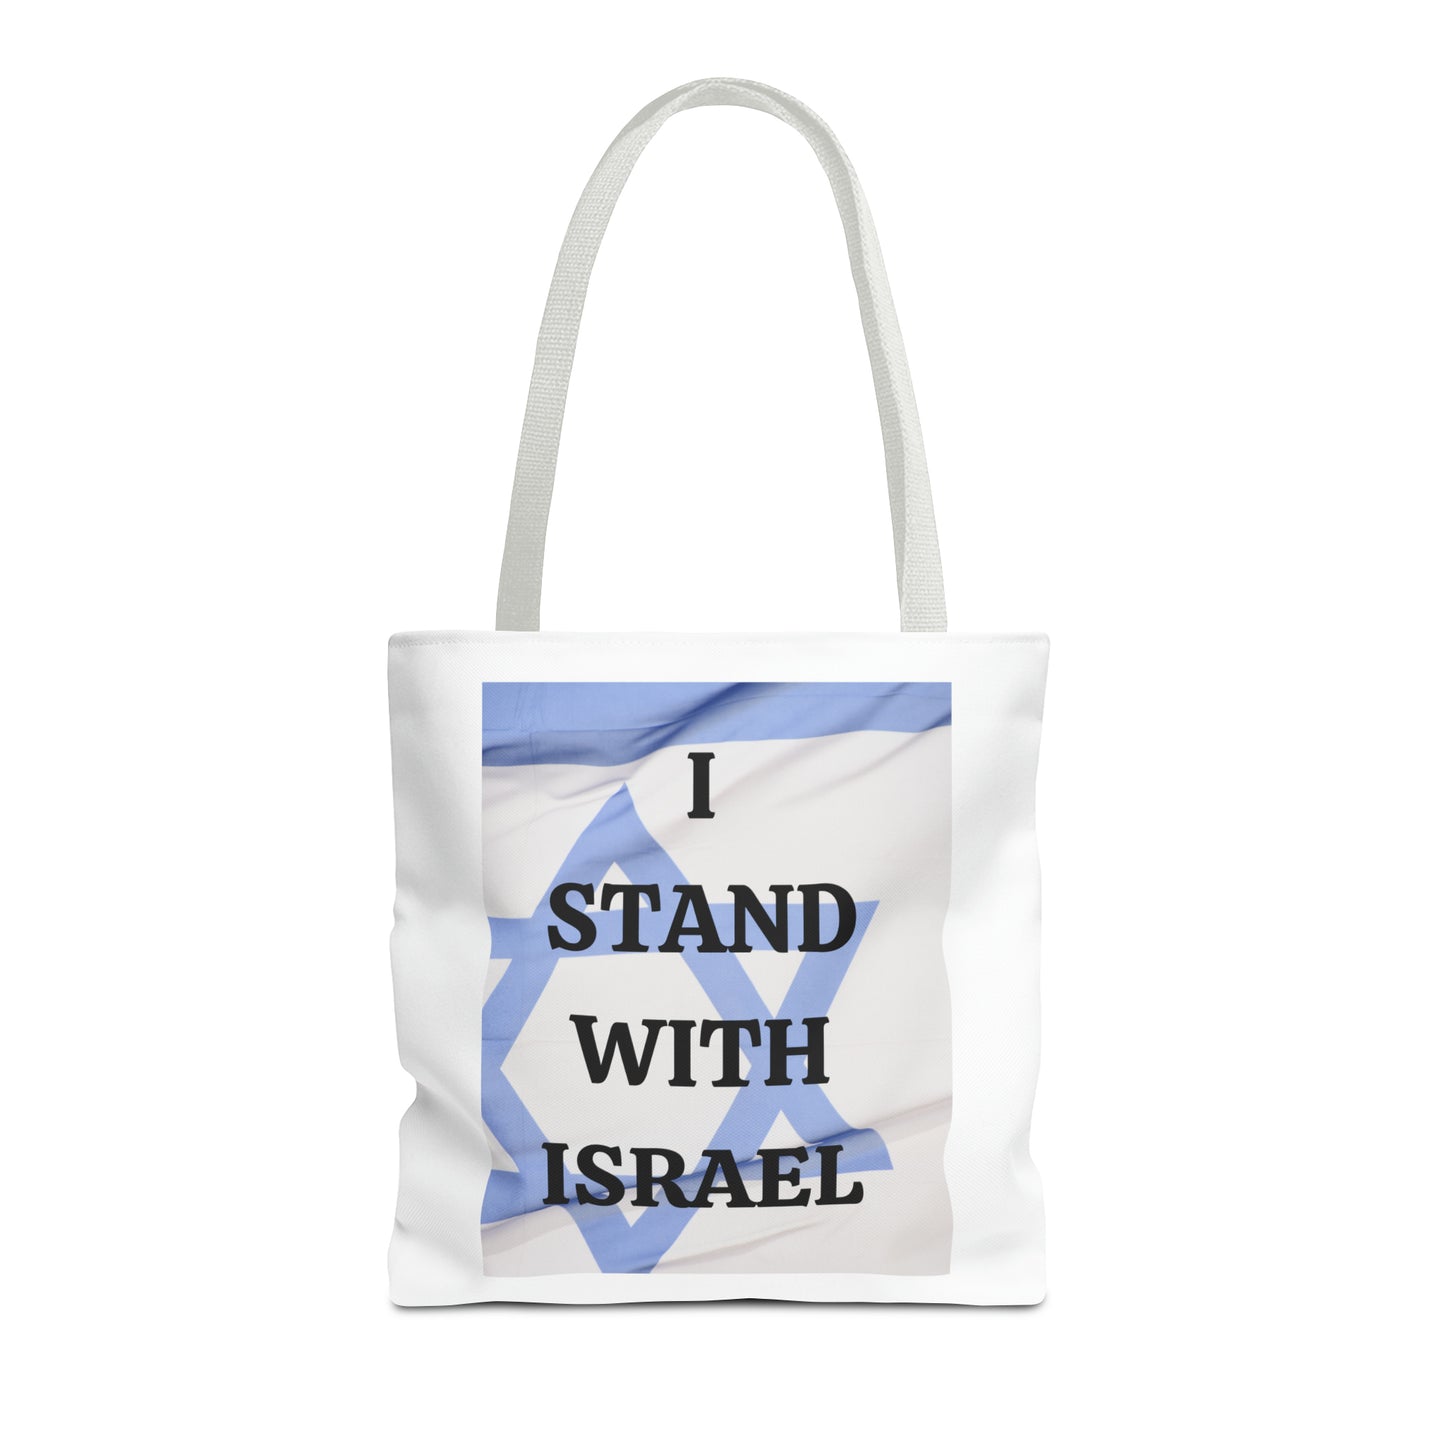 I stand with Israel - Tote Bag